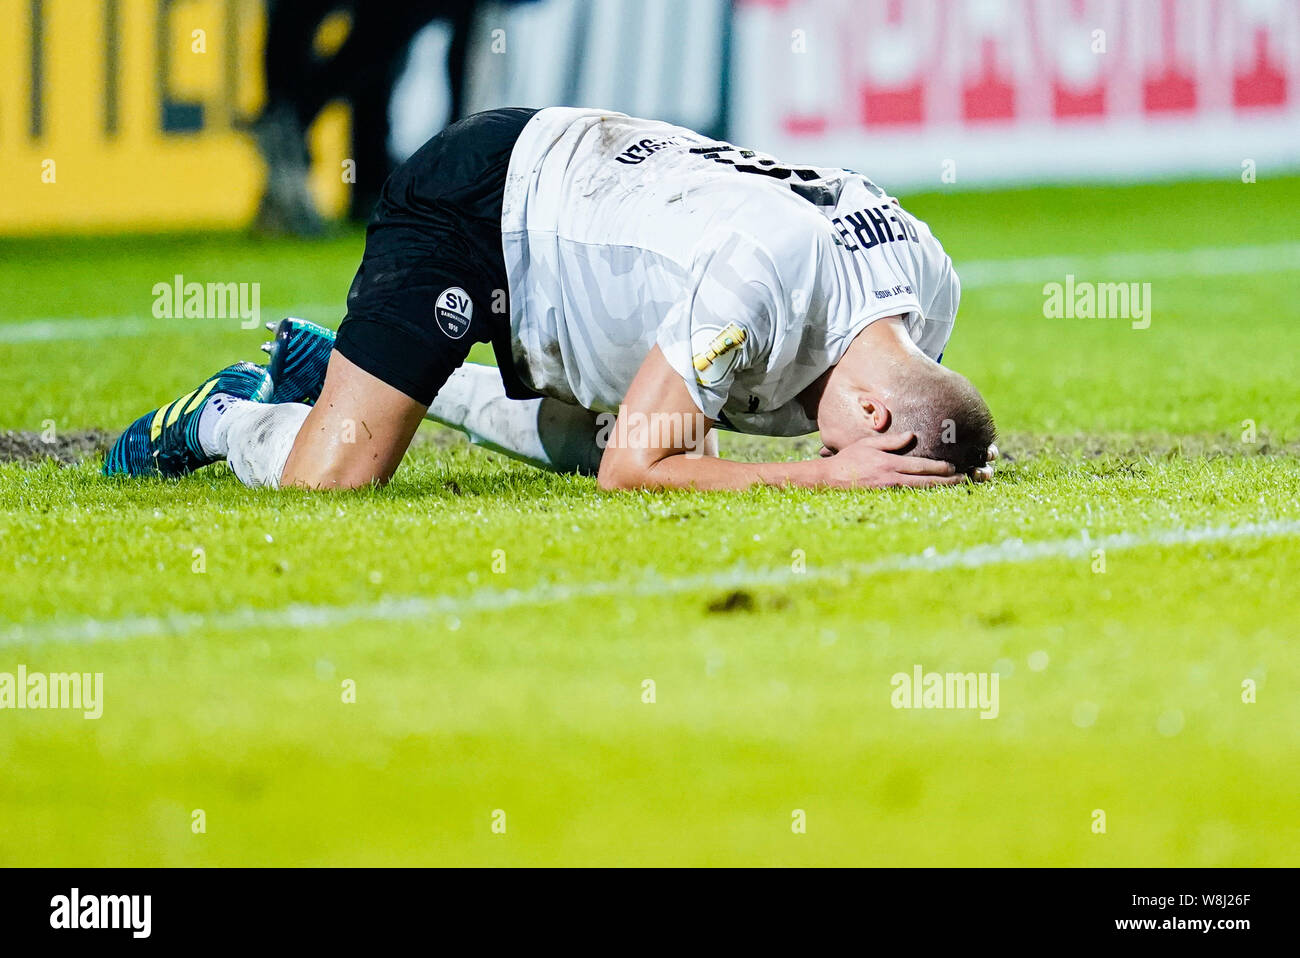 Sandhausen, Germany. 09th Aug, 2019. Soccer: DFB Cup, SV Sandhausen - Borussia Mönchengladbach, 1st round, in Hardtwaldstadion. Sandhausens Kevin Behrens kneels on the pitch. Credit: Uwe Anspach/dpa - IMPORTANT NOTE: In accordance with the requirements of the DFL Deutsche Fußball Liga or the DFB Deutscher Fußball-Bund, it is prohibited to use or have used photographs taken in the stadium and/or the match in the form of sequence images and/or video-like photo sequences./dpa/Alamy Live News Stock Photo